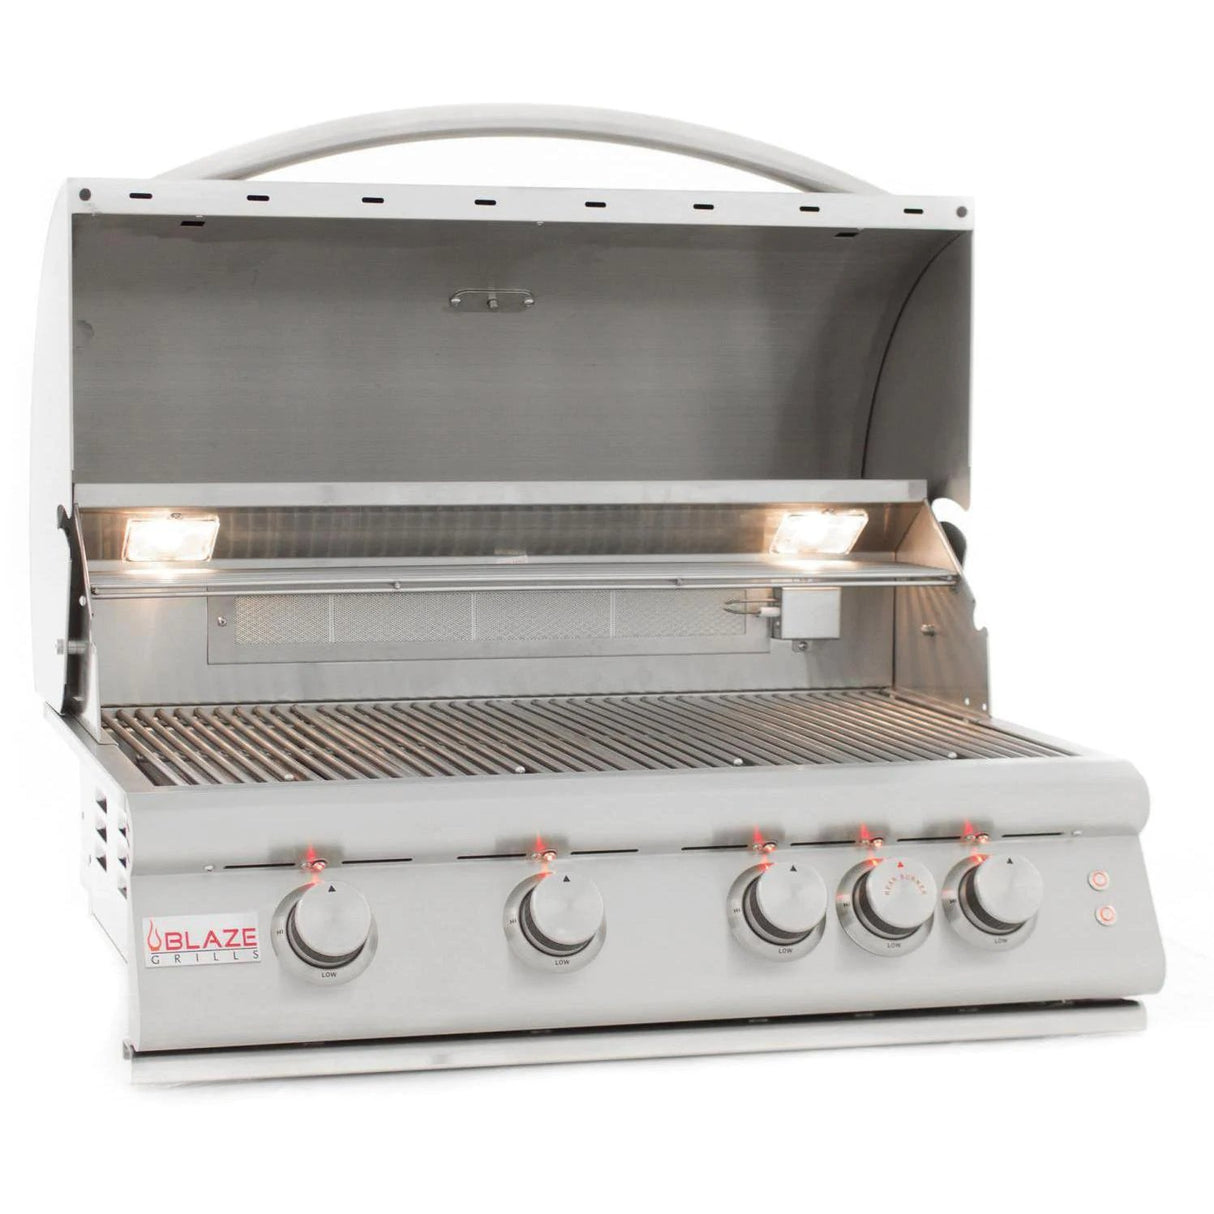 Blaze LTE 32-Inch 4-Burner Built-In Gas Grill With Rear Infrared Burner & Grill Lights